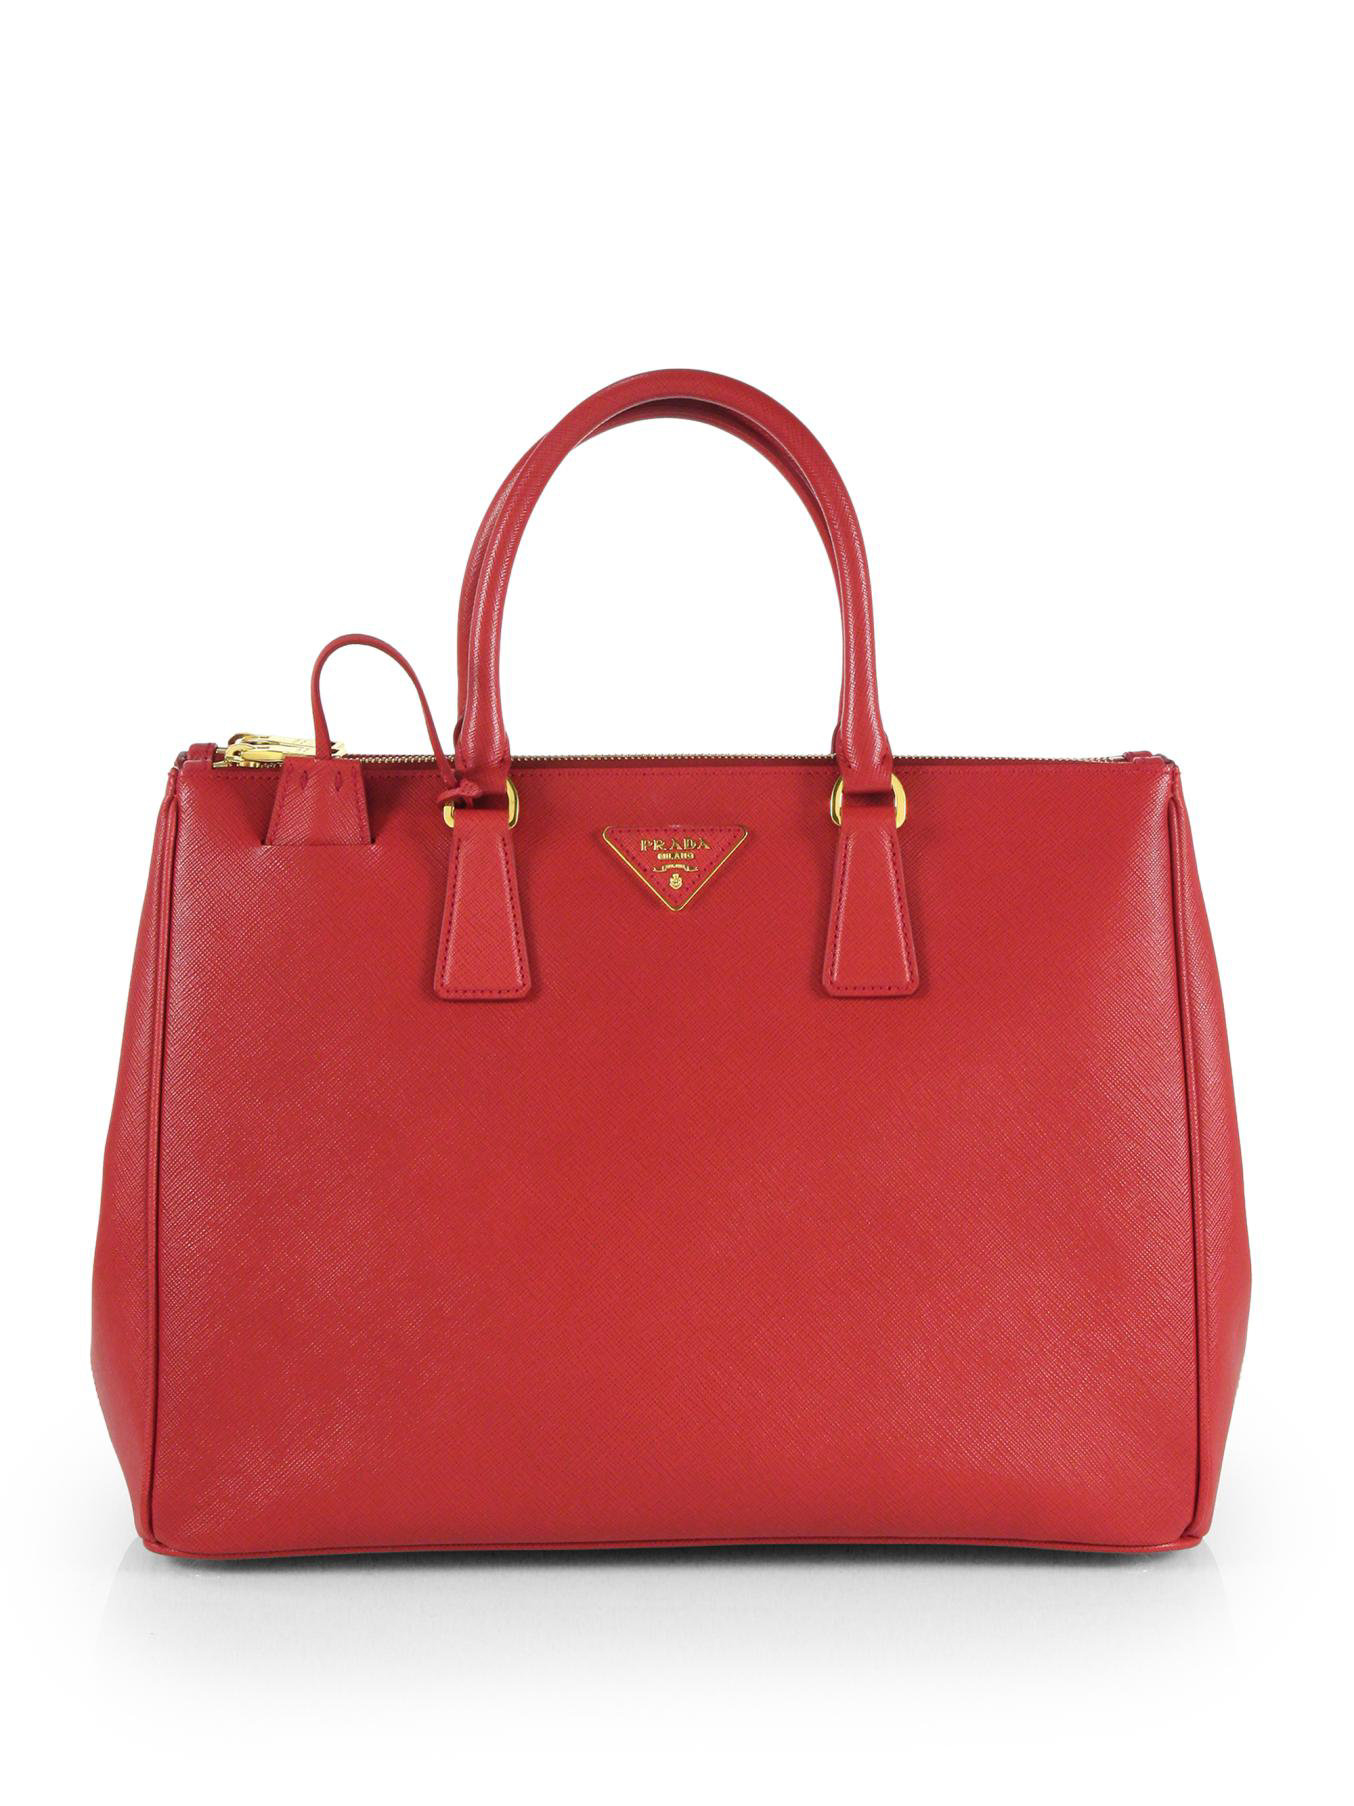 Prada Saffiano Lux Large Double-zip Tote in Red | Lyst